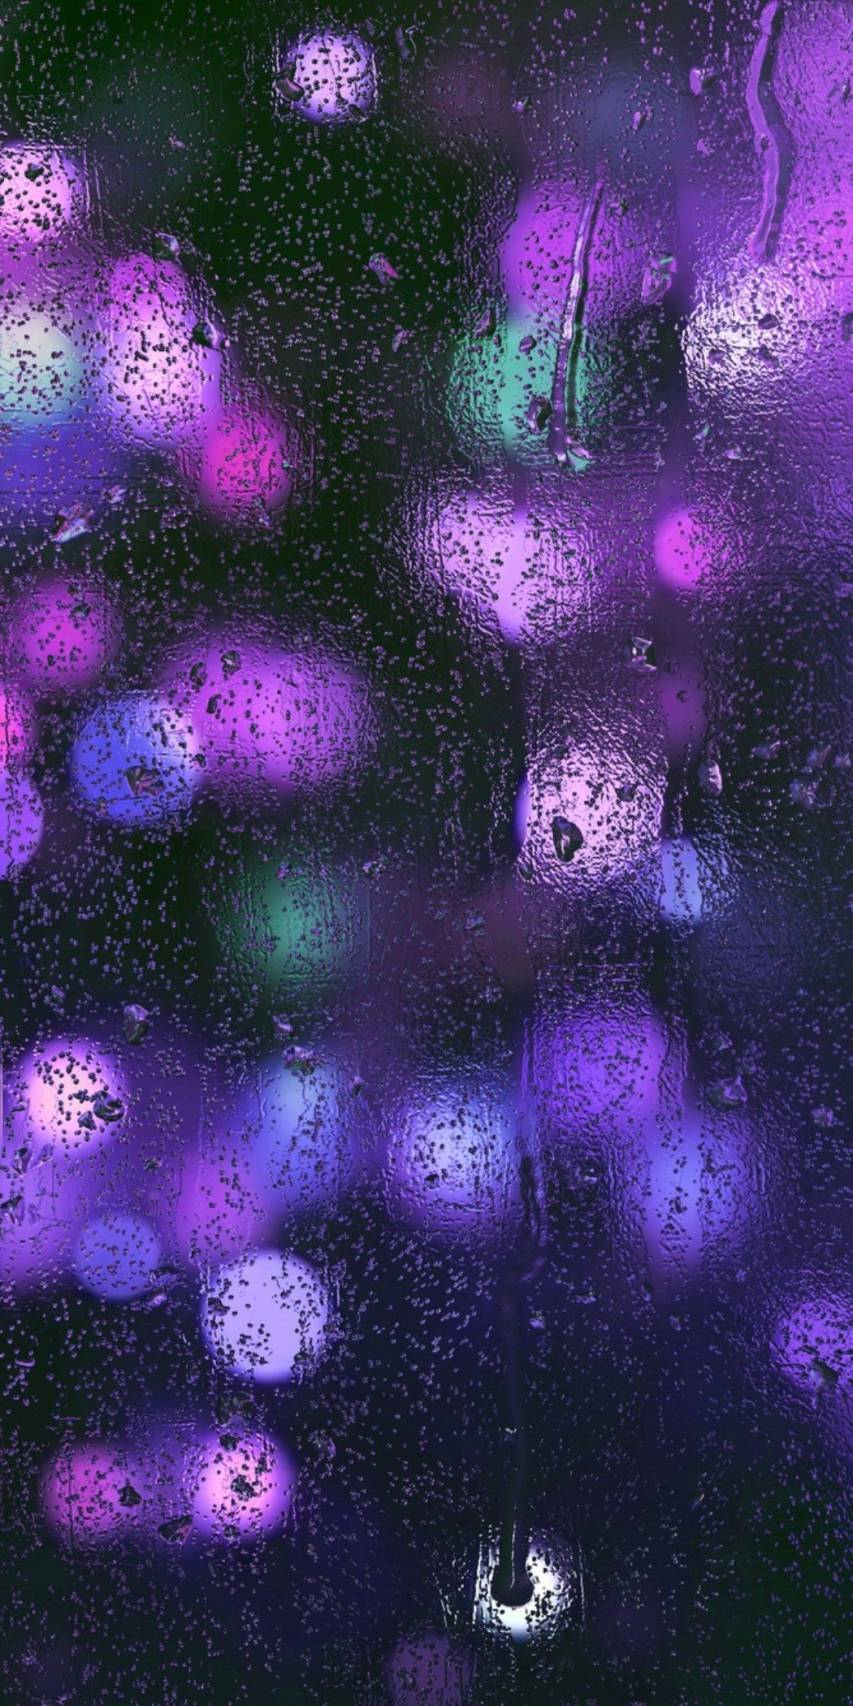 A purple and blue abstract background image of a rain covered window - Dark purple